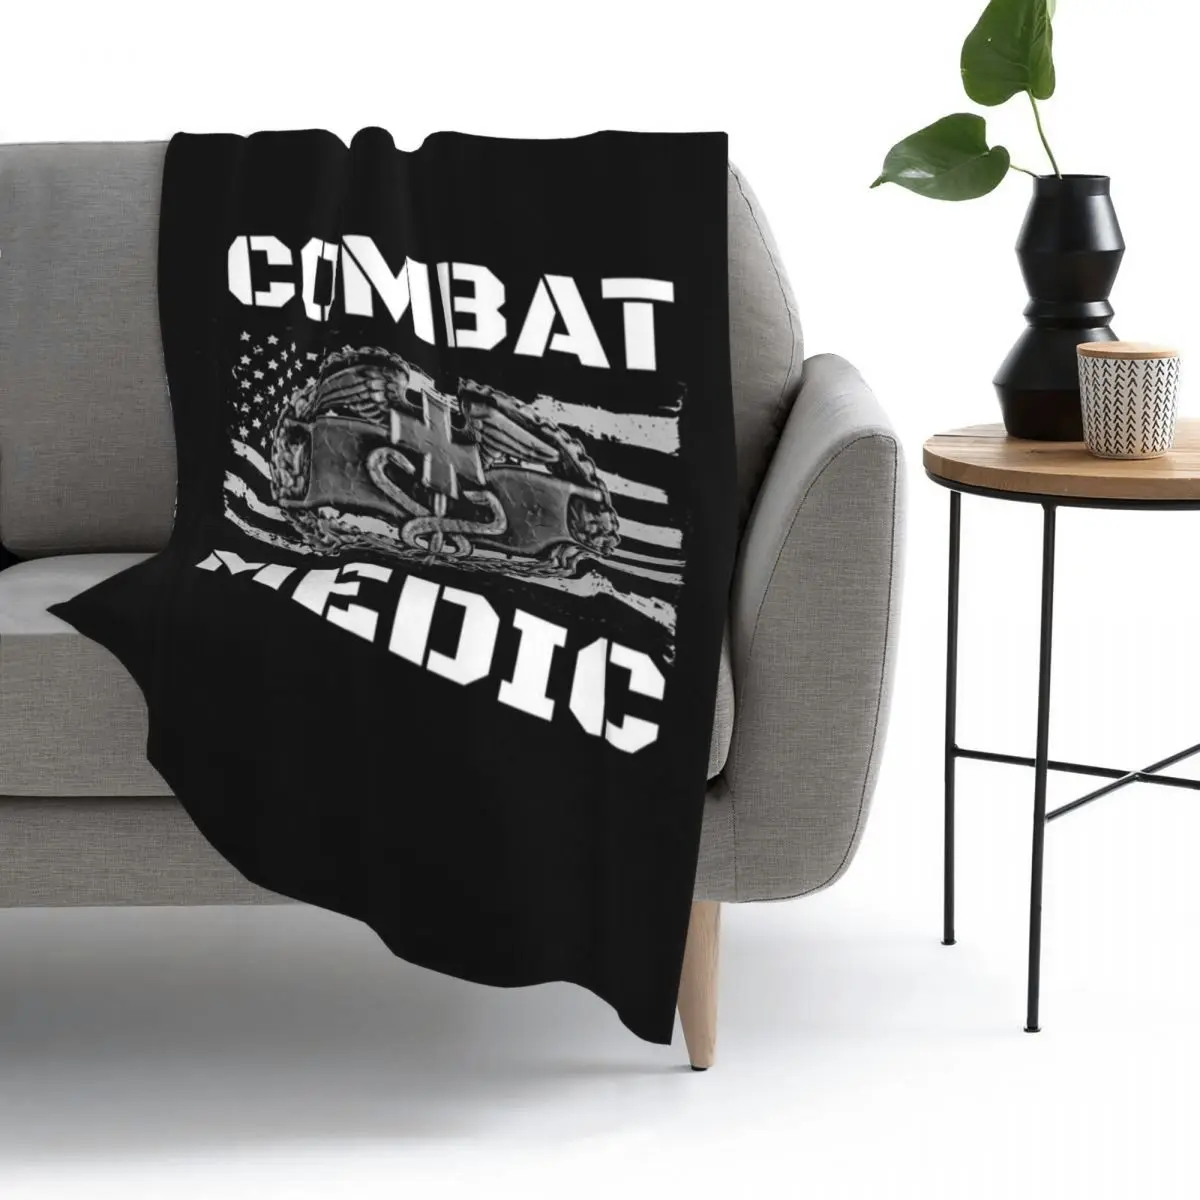 

US ARMY Combat Medic Perfect Veteran Medical Military Blankets Flannel Portable Throw Blanket for Home Bedroom Office Throws